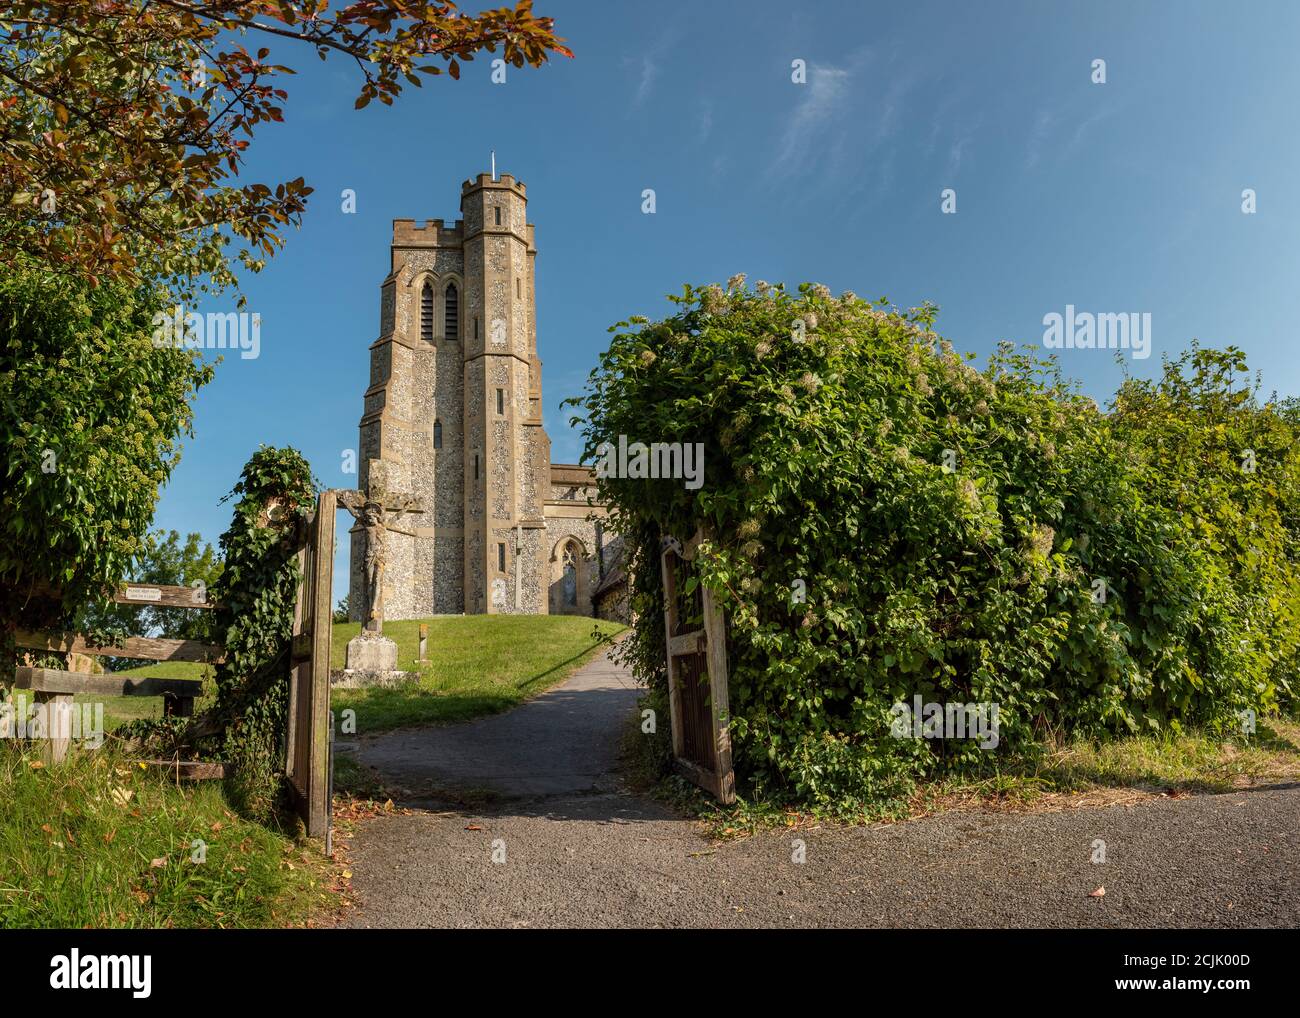 Ellesborough Church and its wooden gate, Chiltern Hills, England Stock Photo